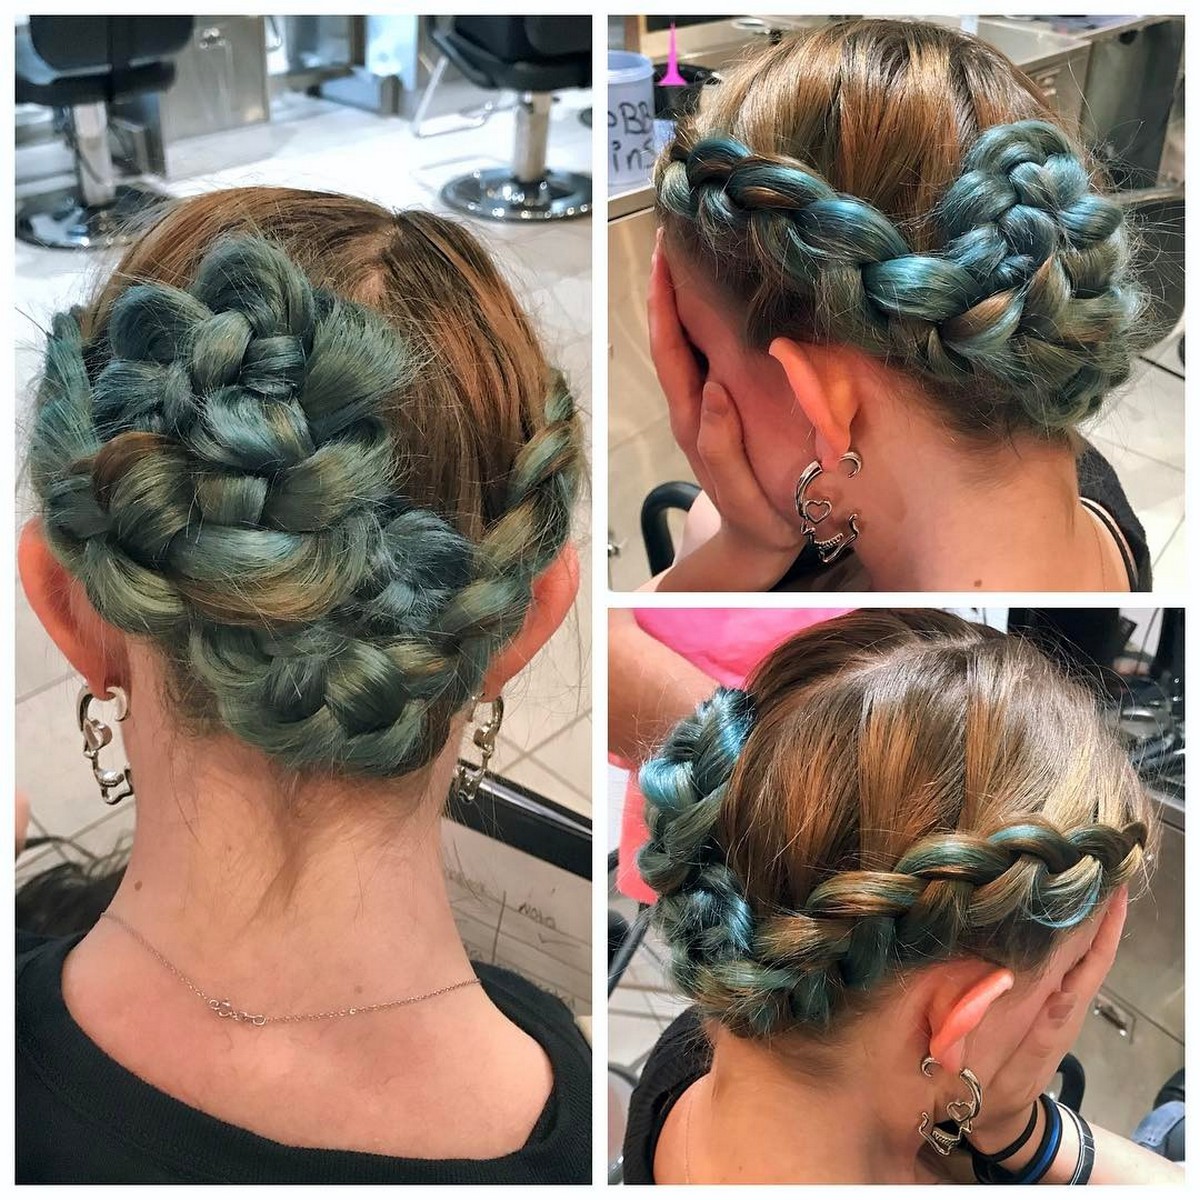 Blue Braided Hairstyle